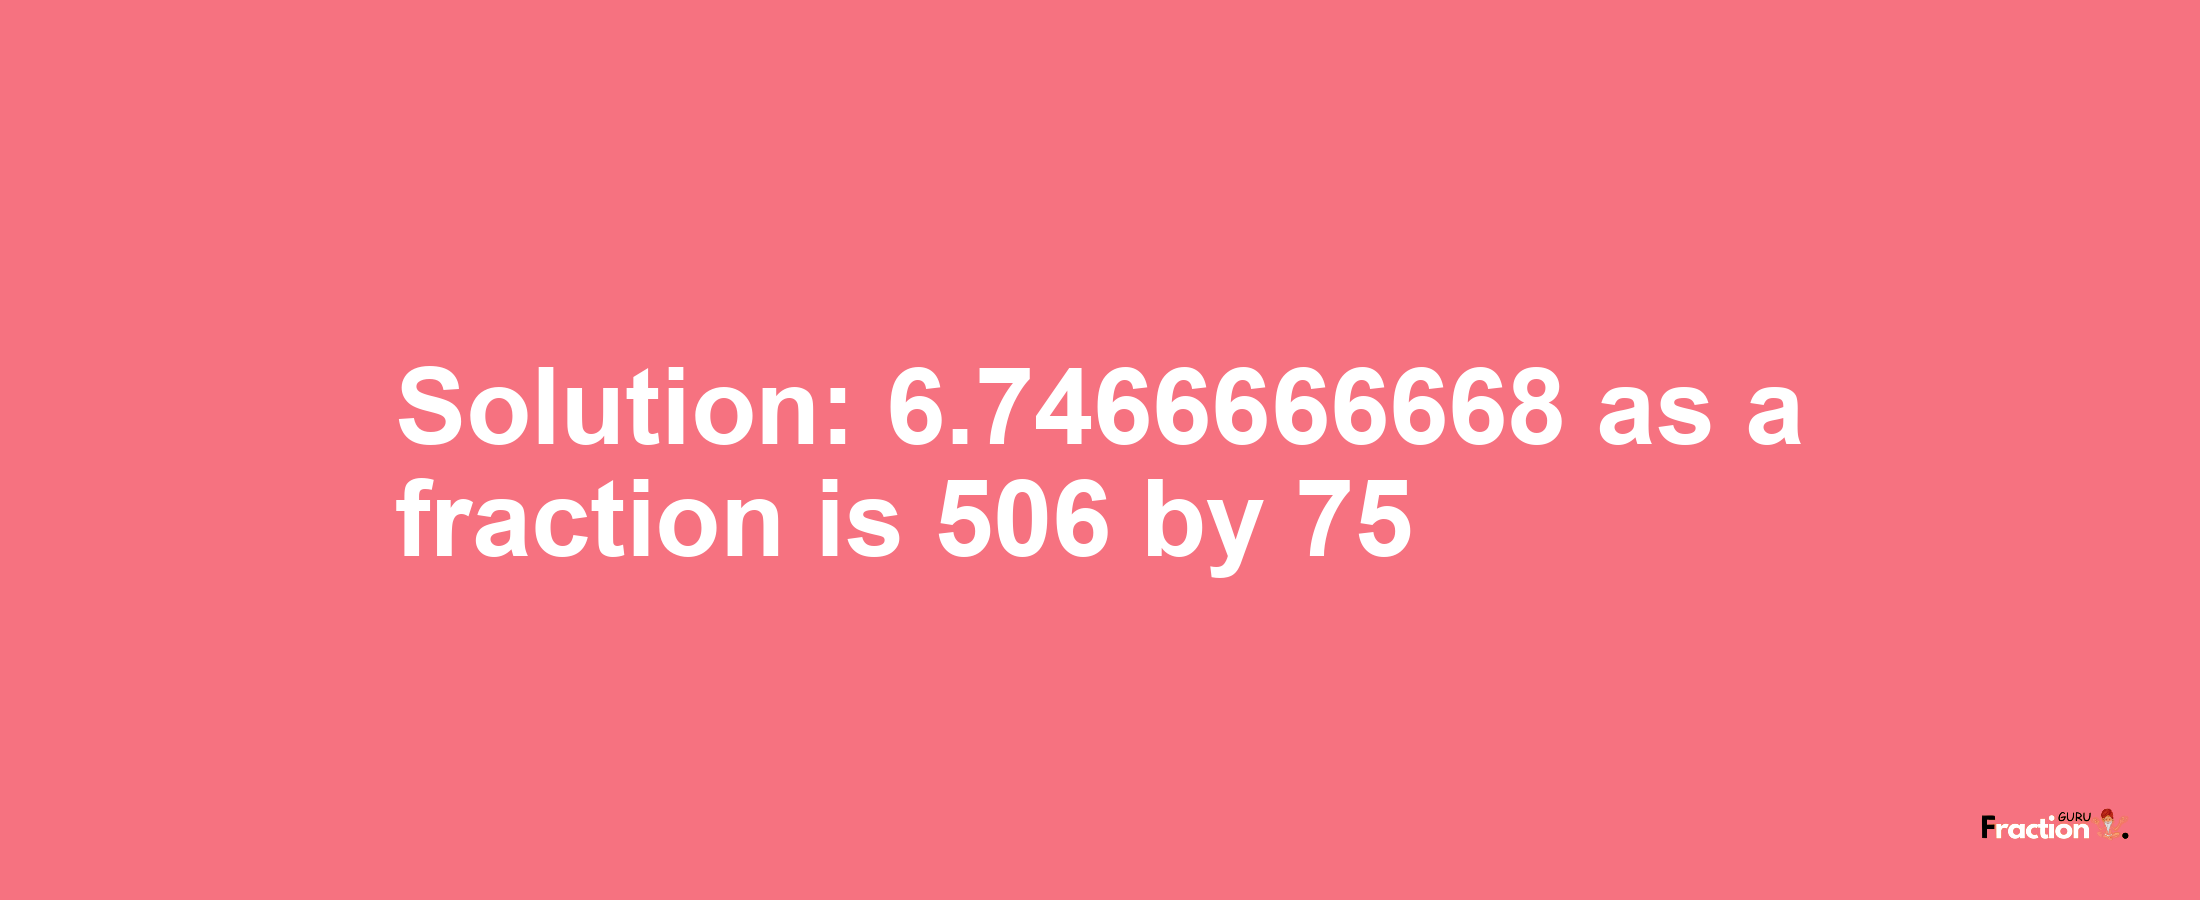 Solution:6.7466666668 as a fraction is 506/75